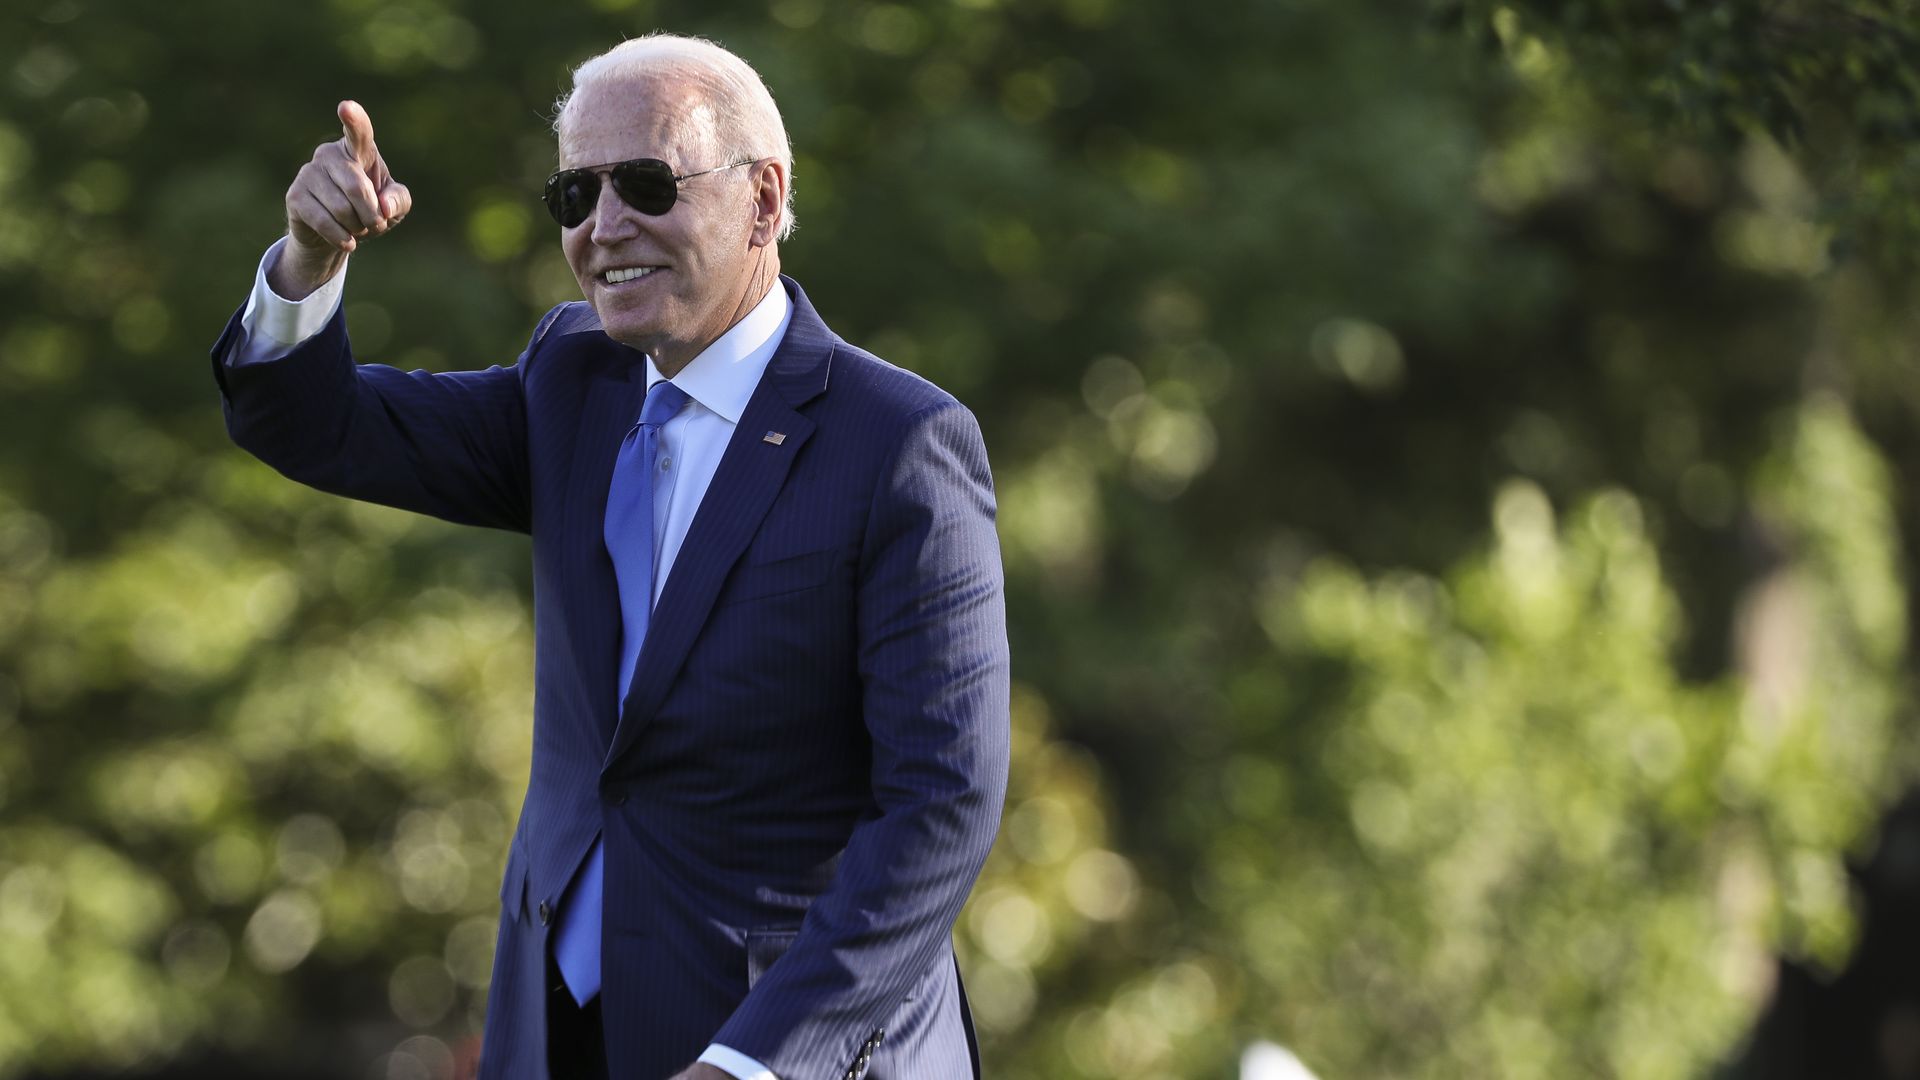 President Joe Biden gestures while walking on the South Lawn of the White House before boarding Marine One in Washington, D.C., U.S., on Friday, June 25, 2021.